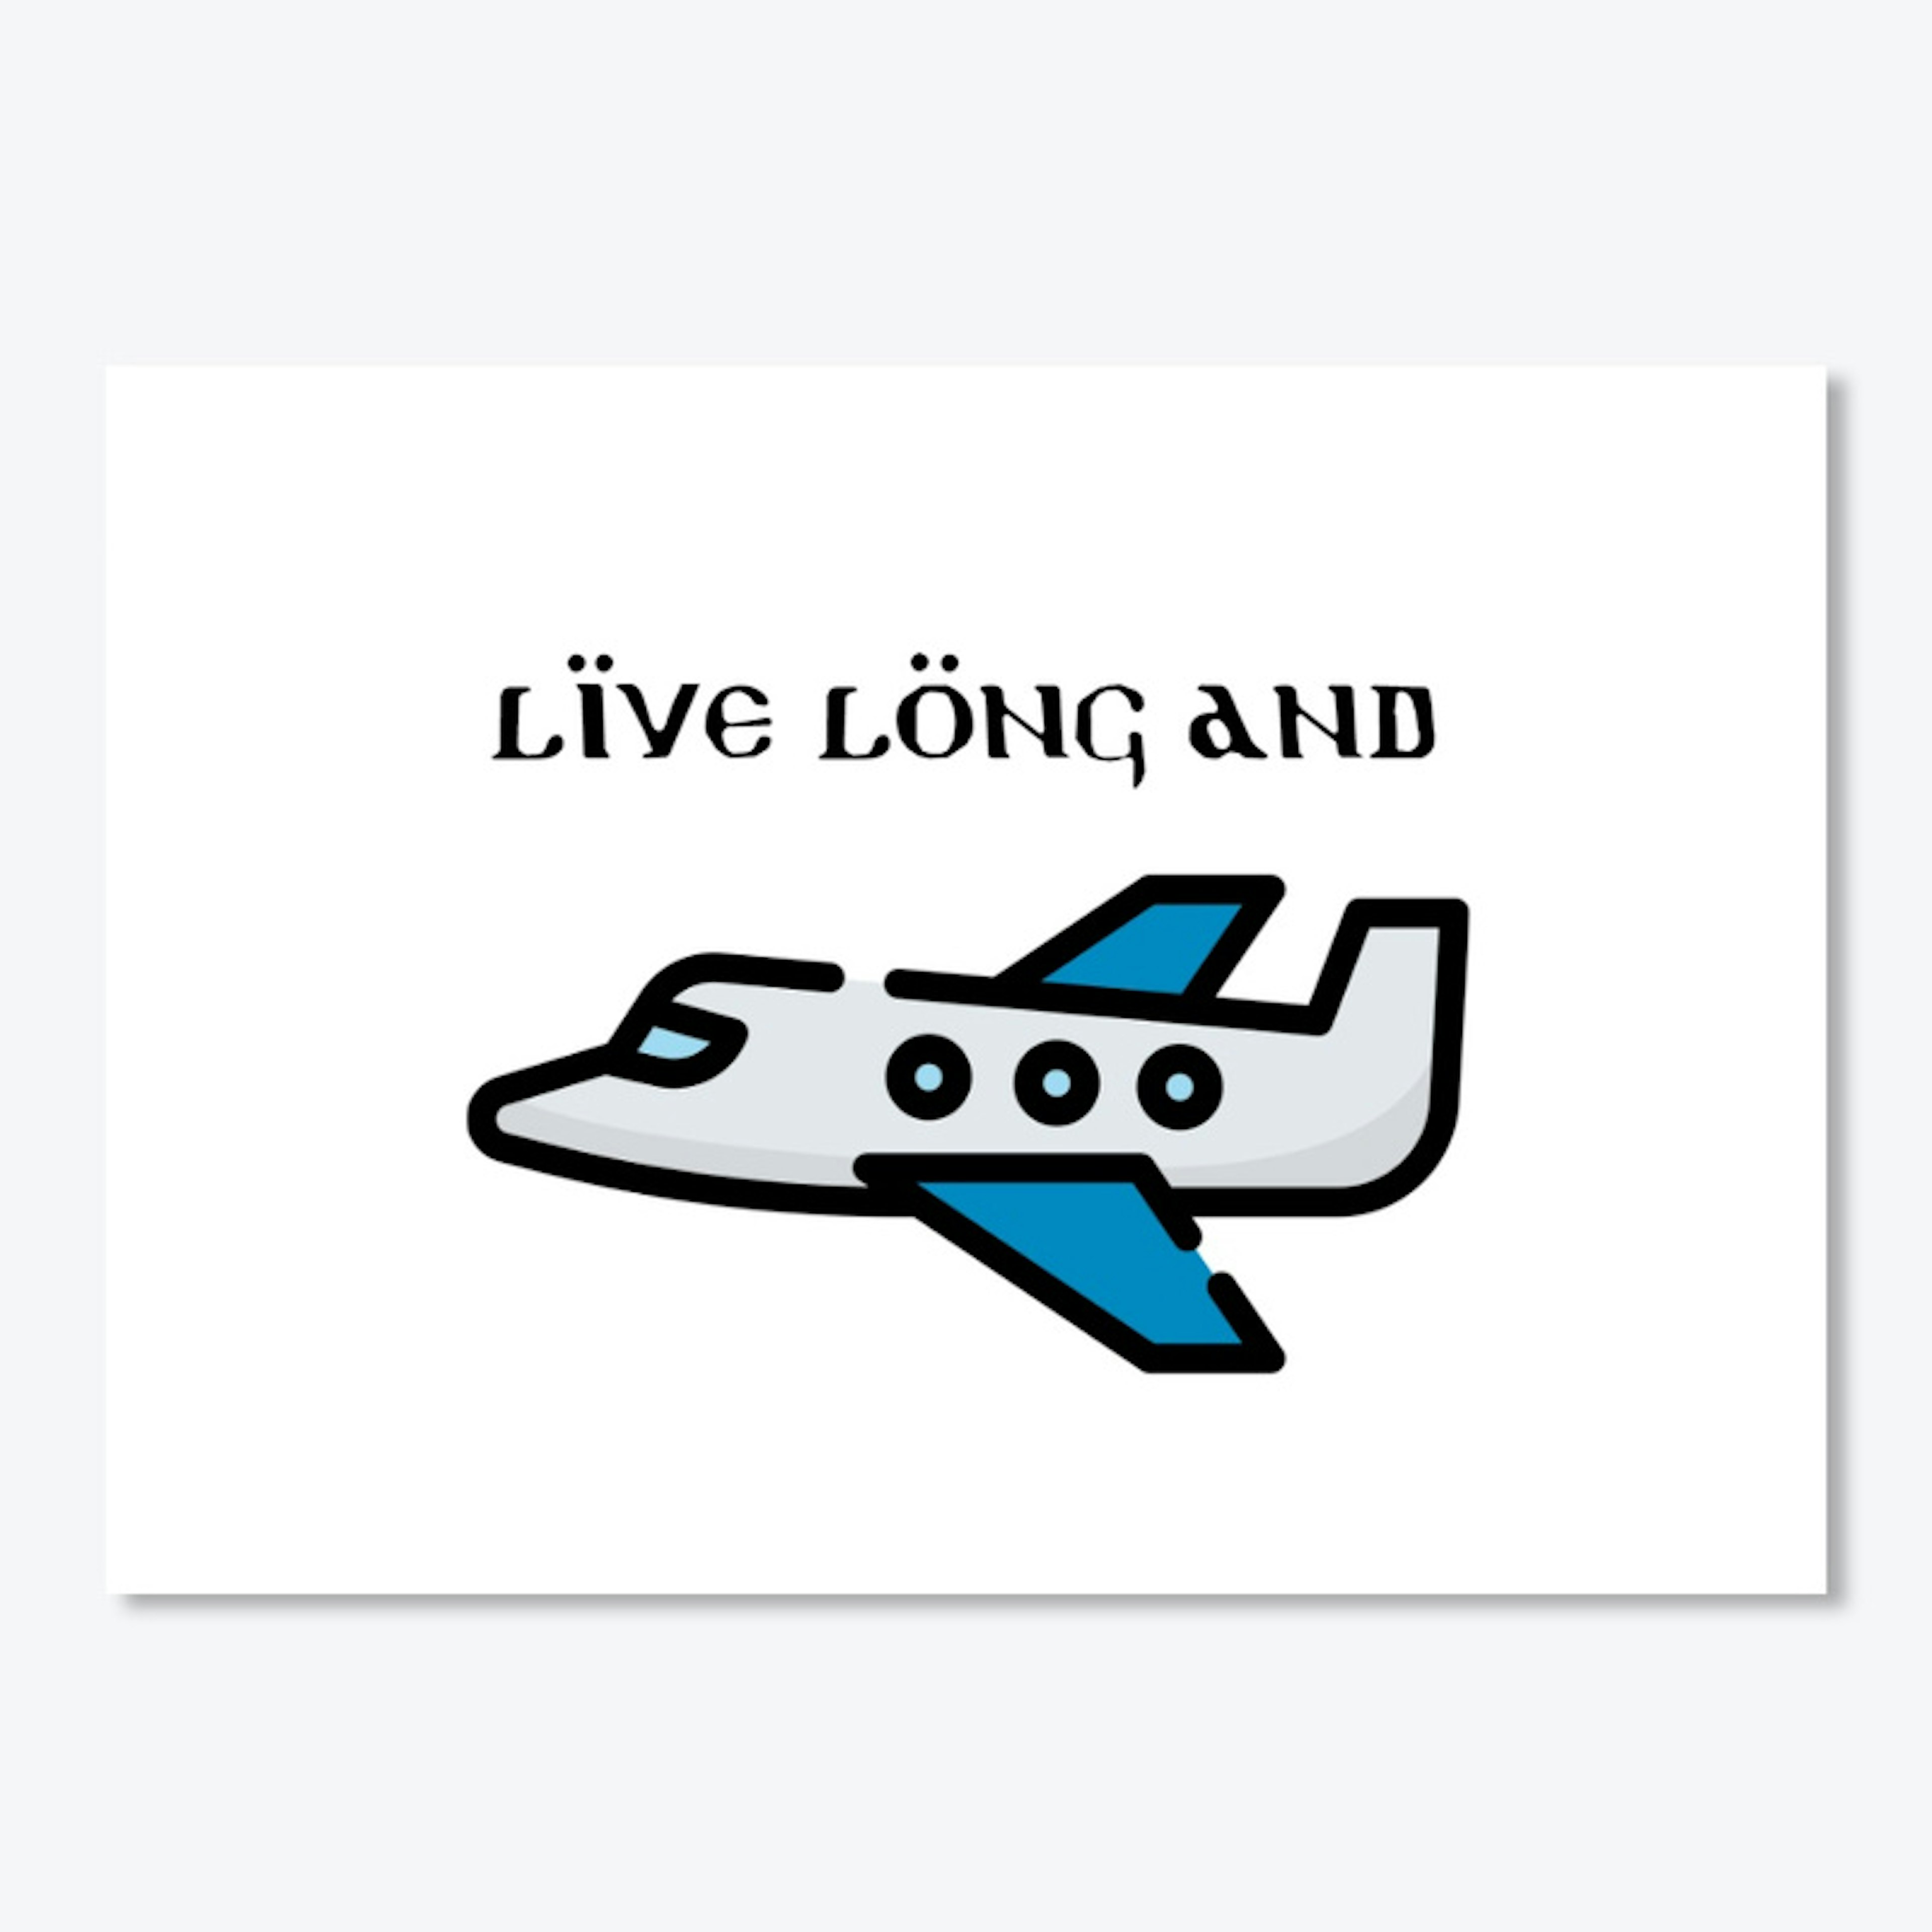 Live Long and FLY